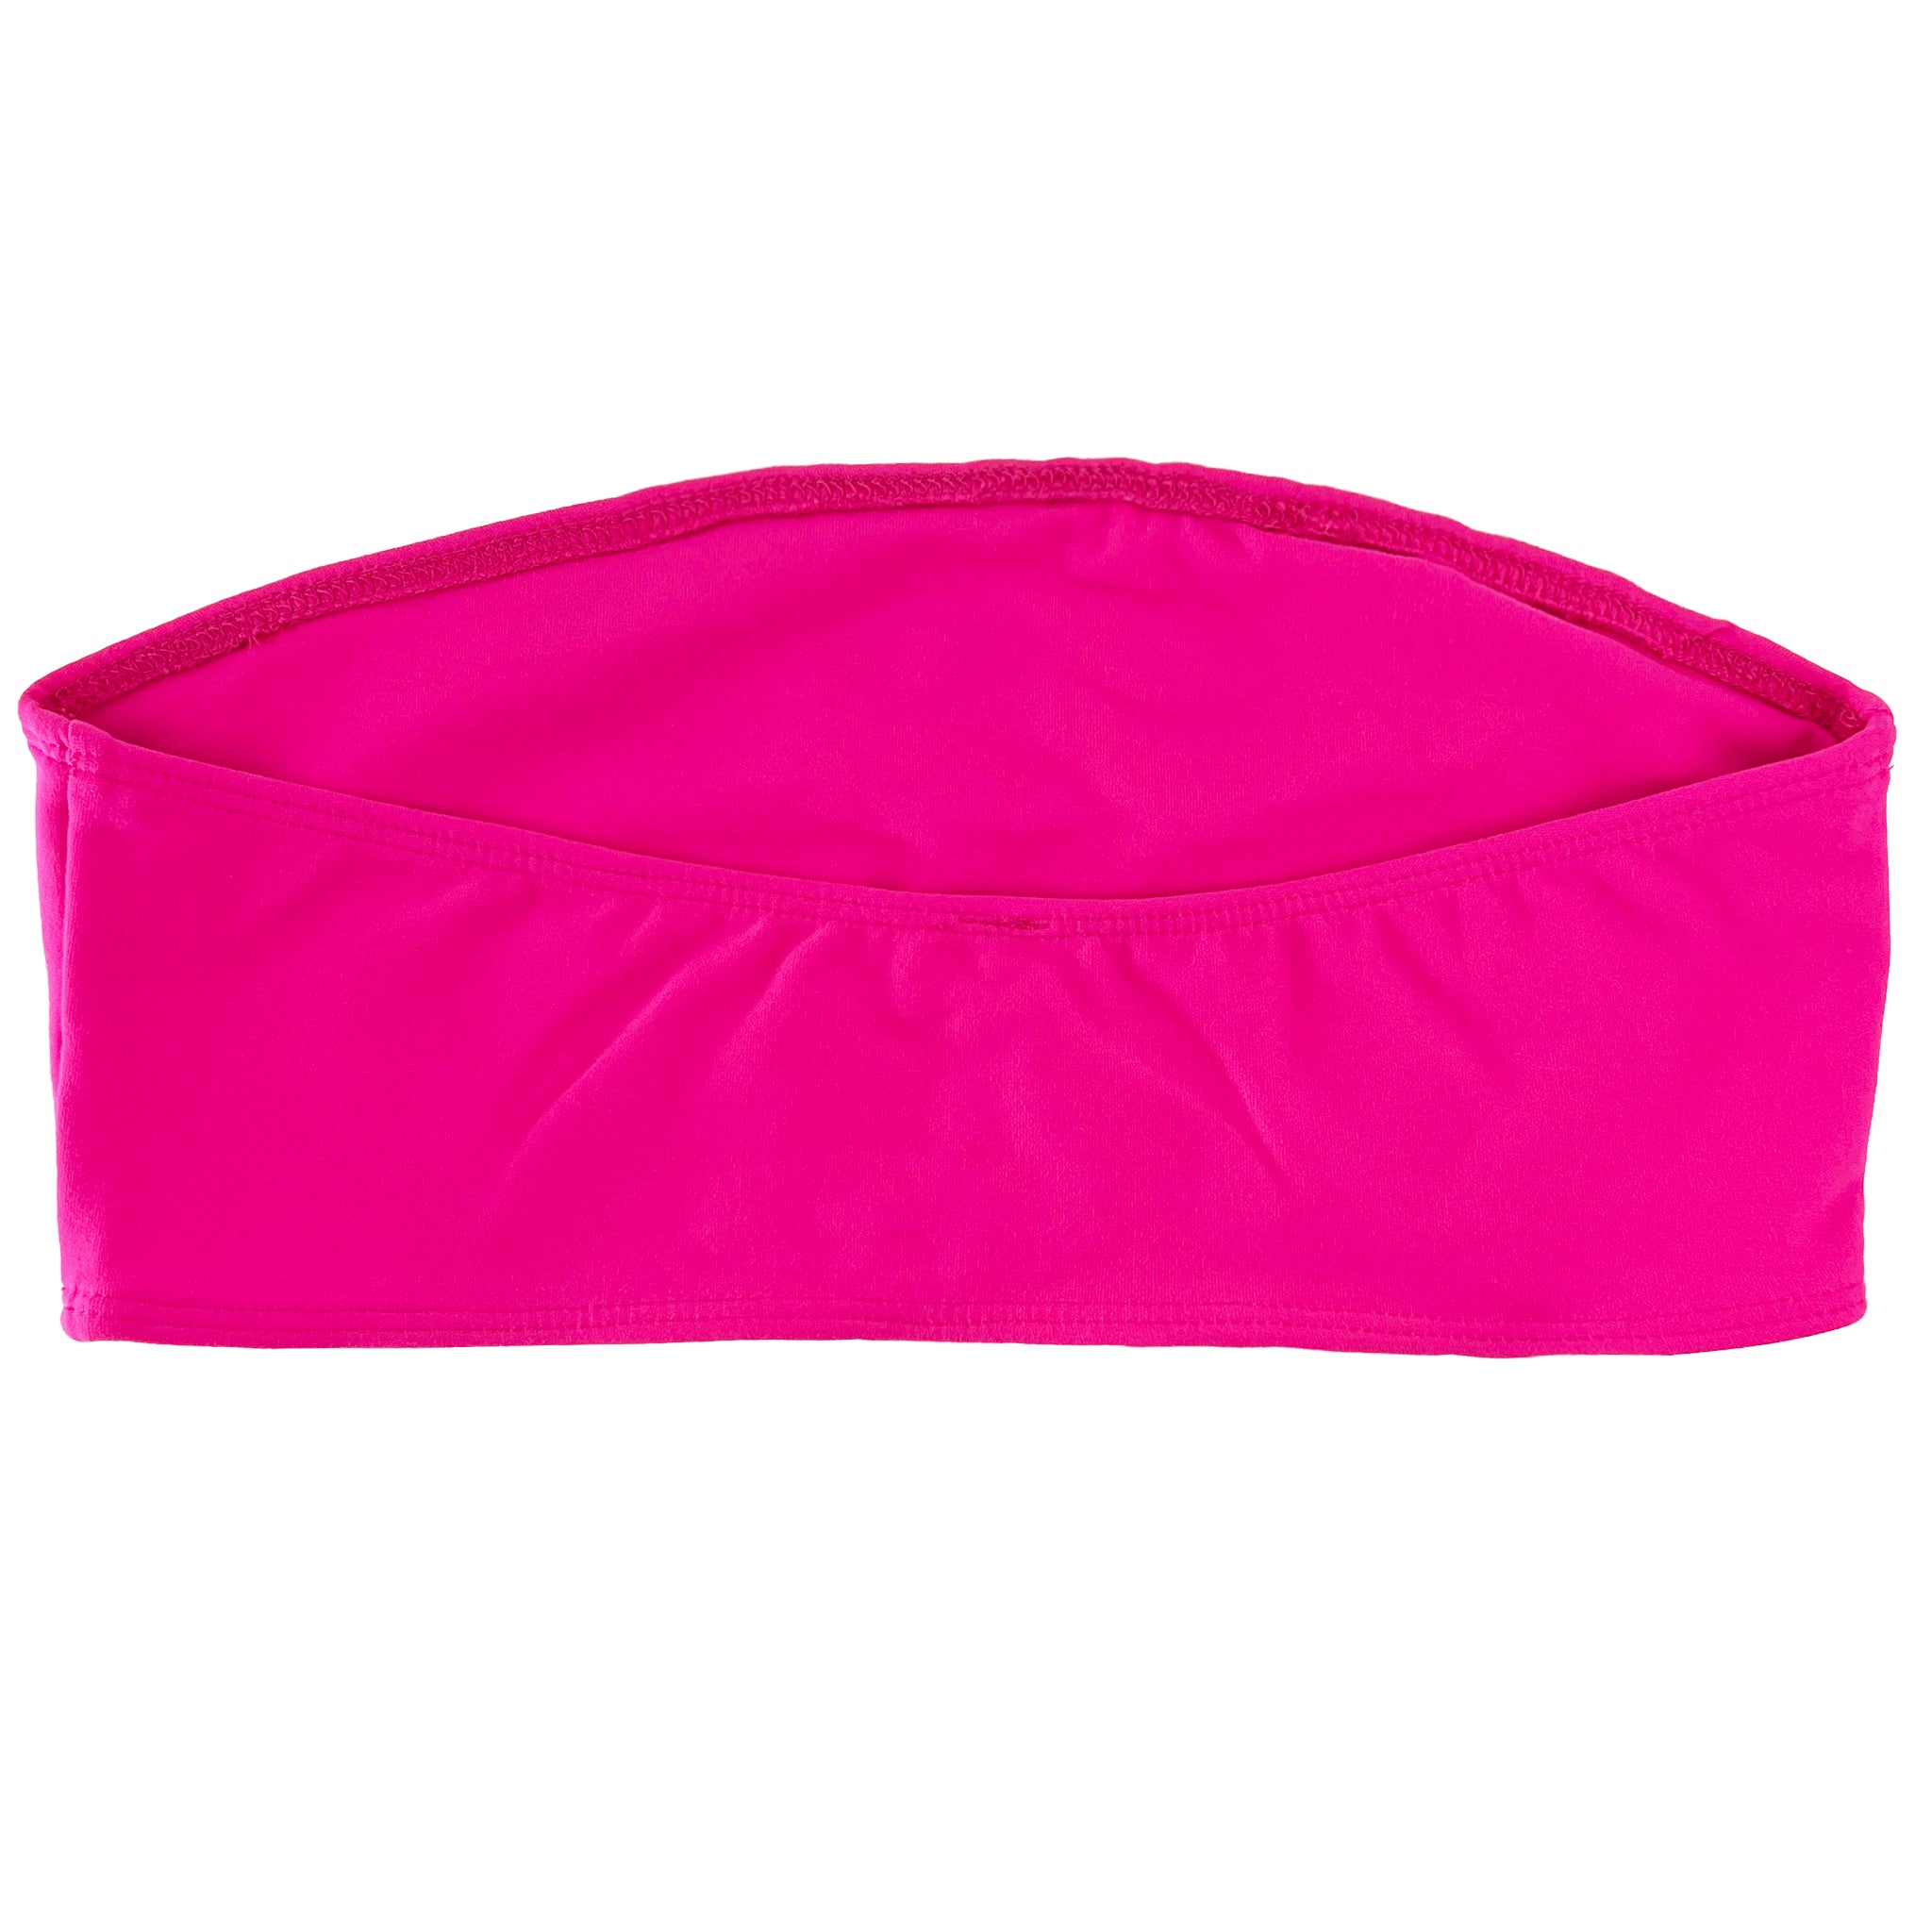 Luxari Bandeau Top | Hot Pink